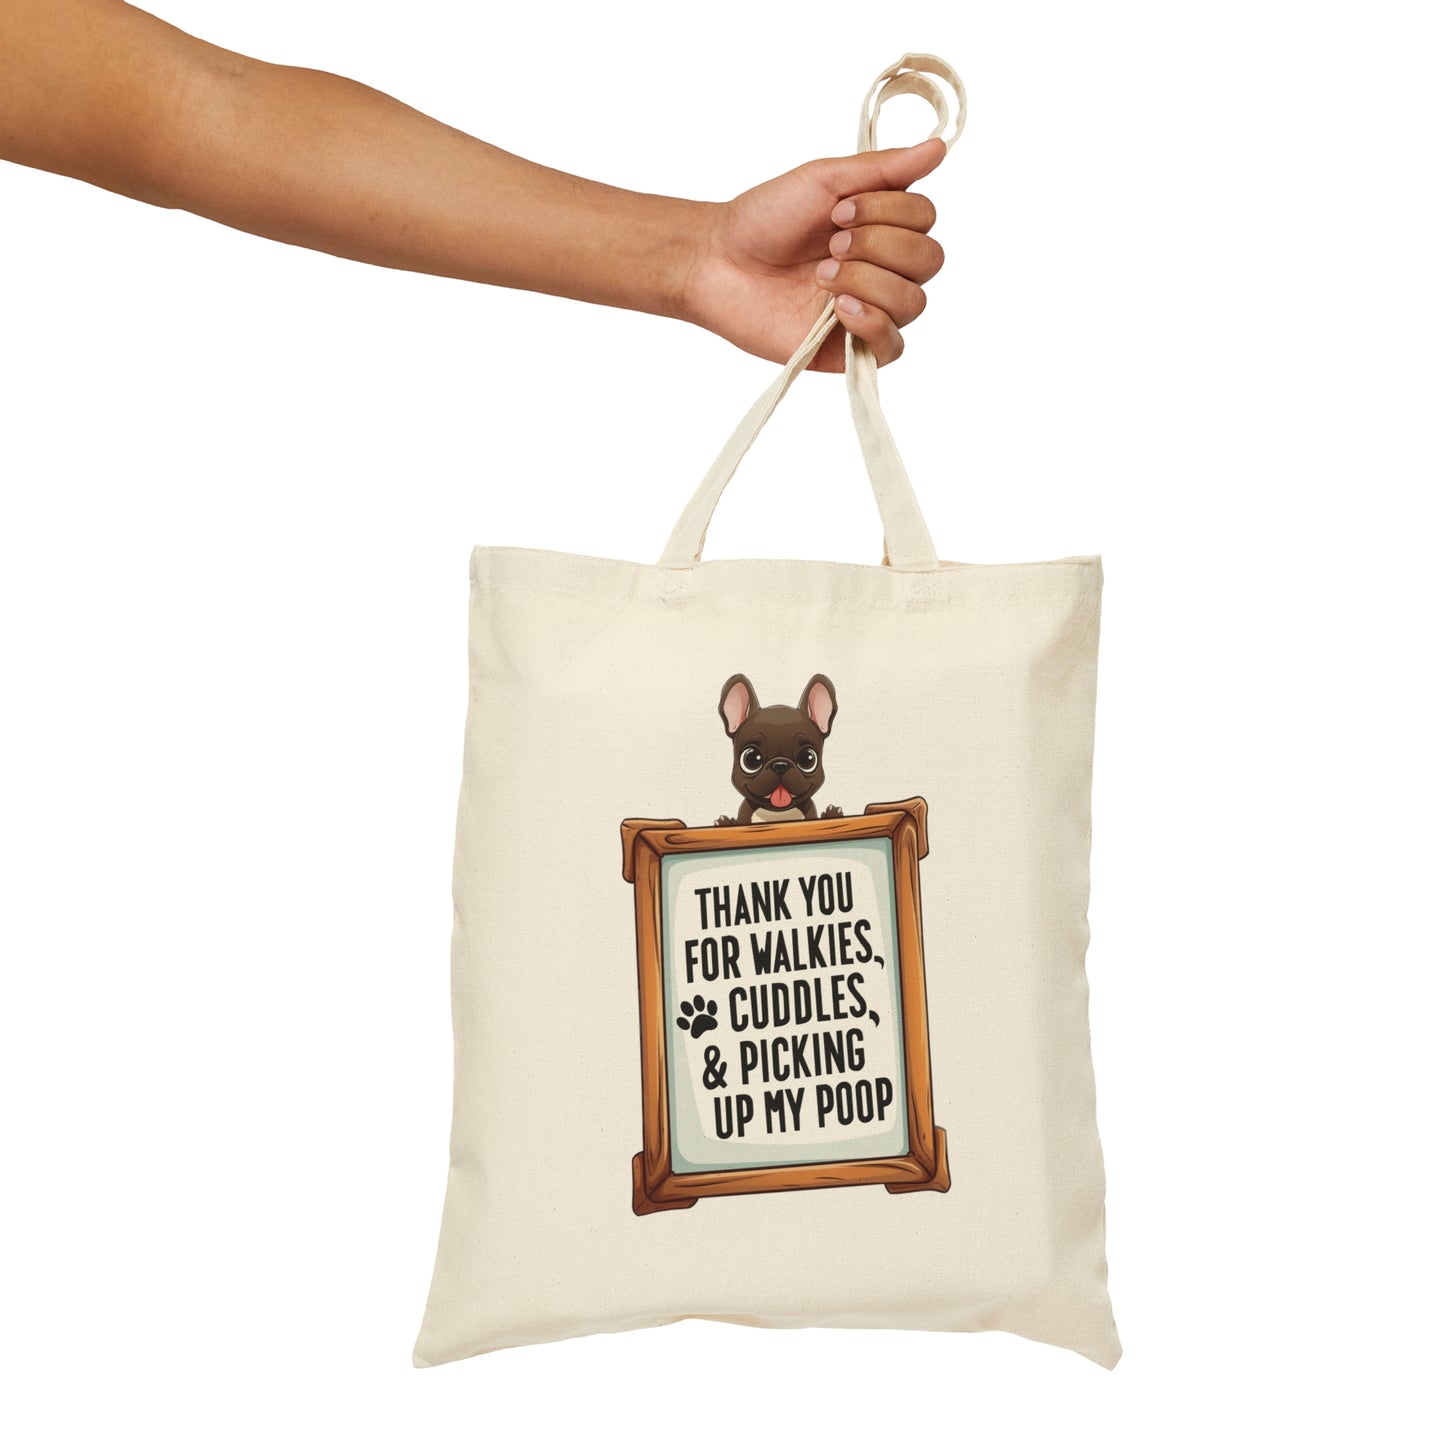 Frenchie Thank You Card, Thank Dog I Have You, Cotton Canvas Tote Bag